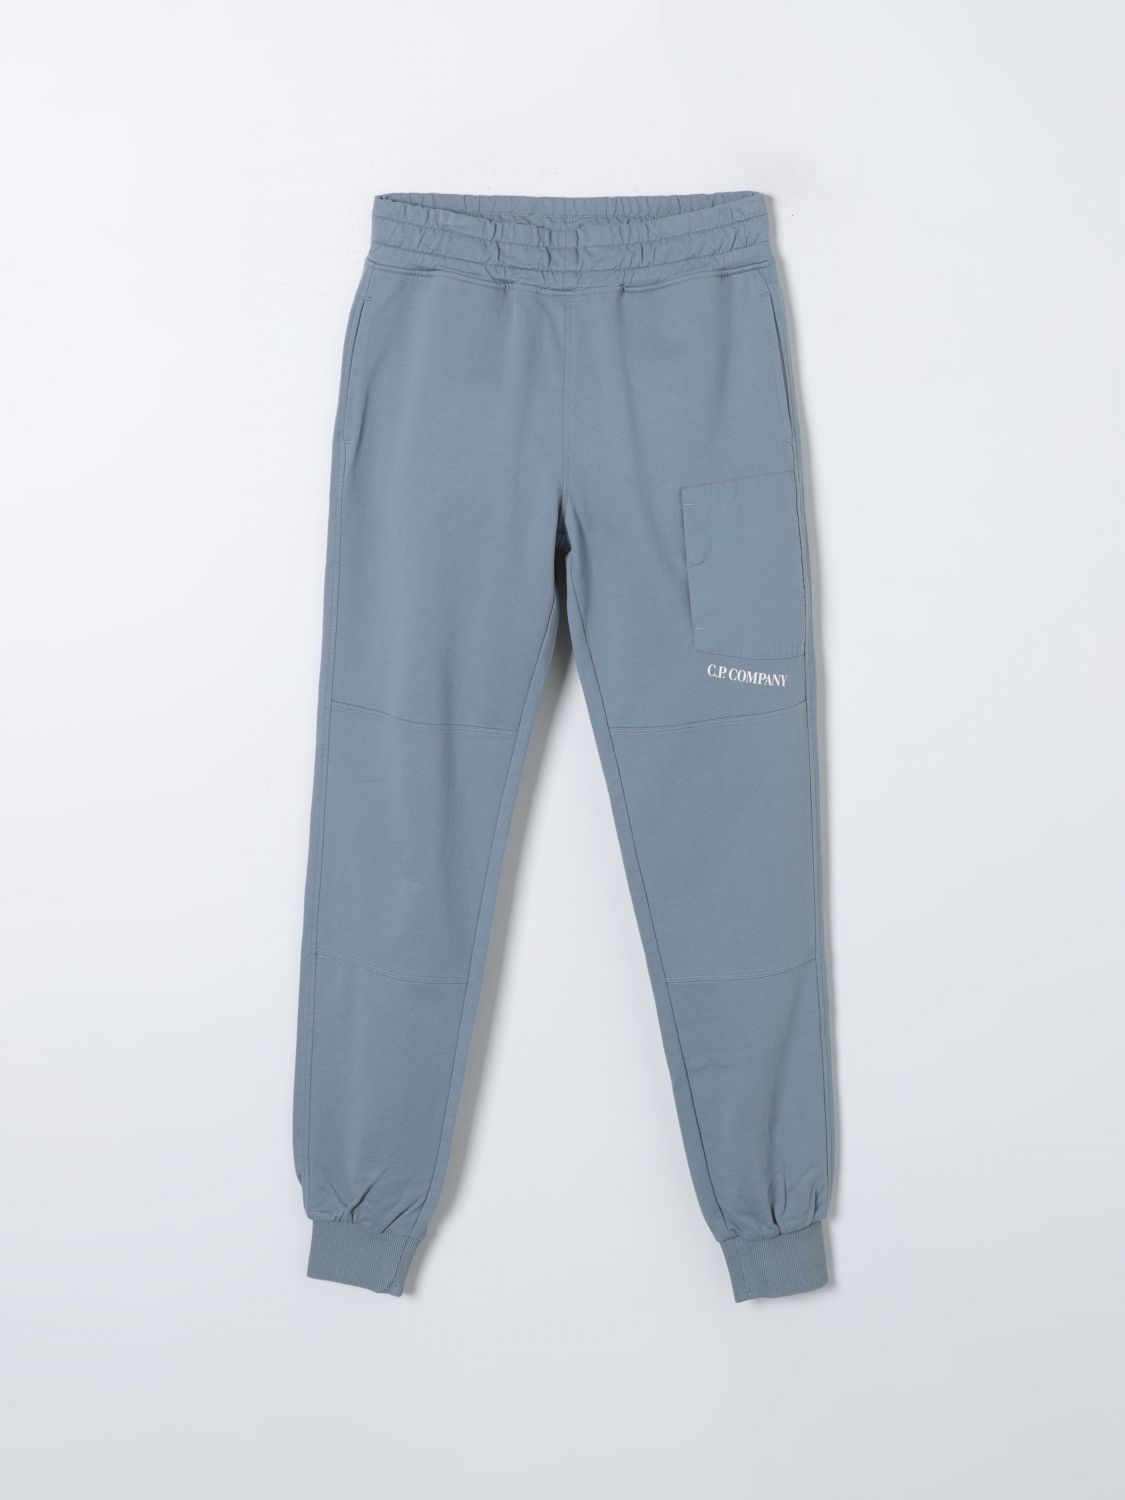 C.p. Company Trousers  Kids In Grey